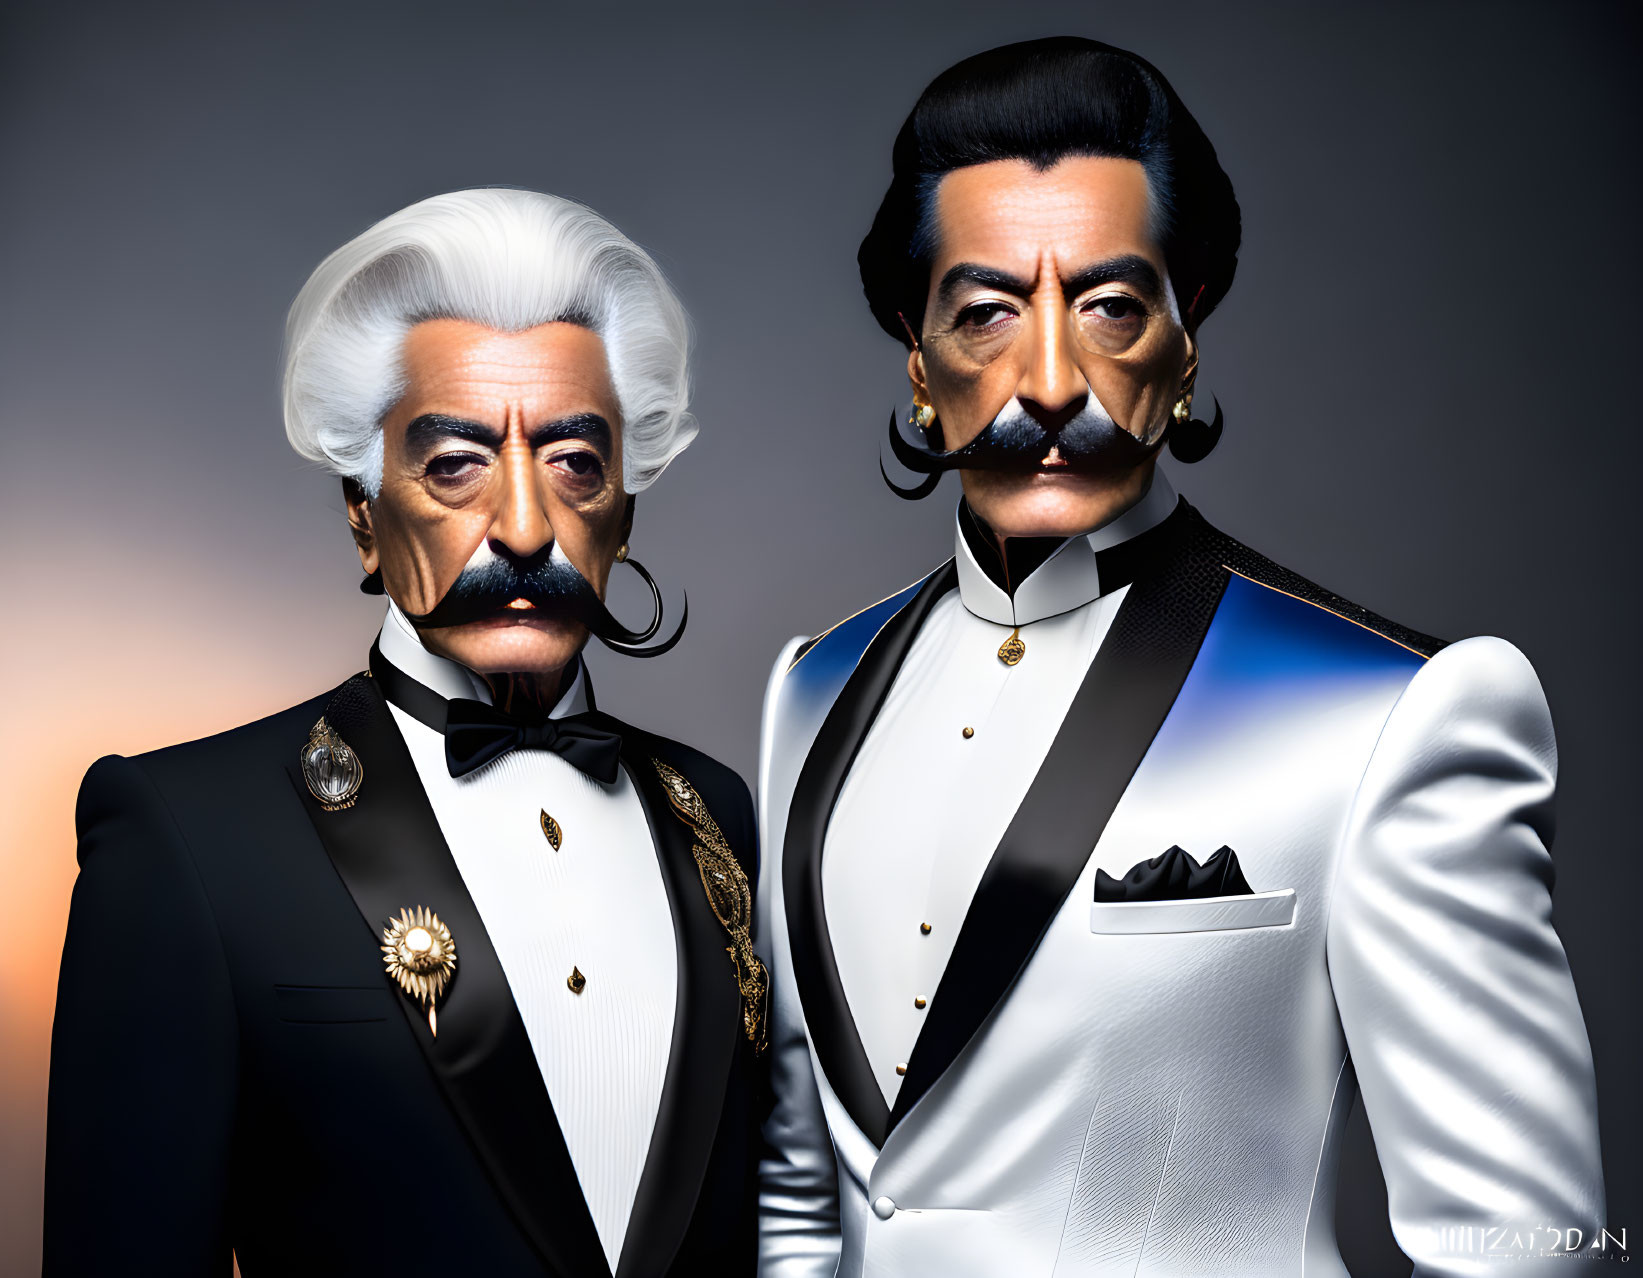 Stylized male figures in formal attire with exaggerated facial features on gradient background